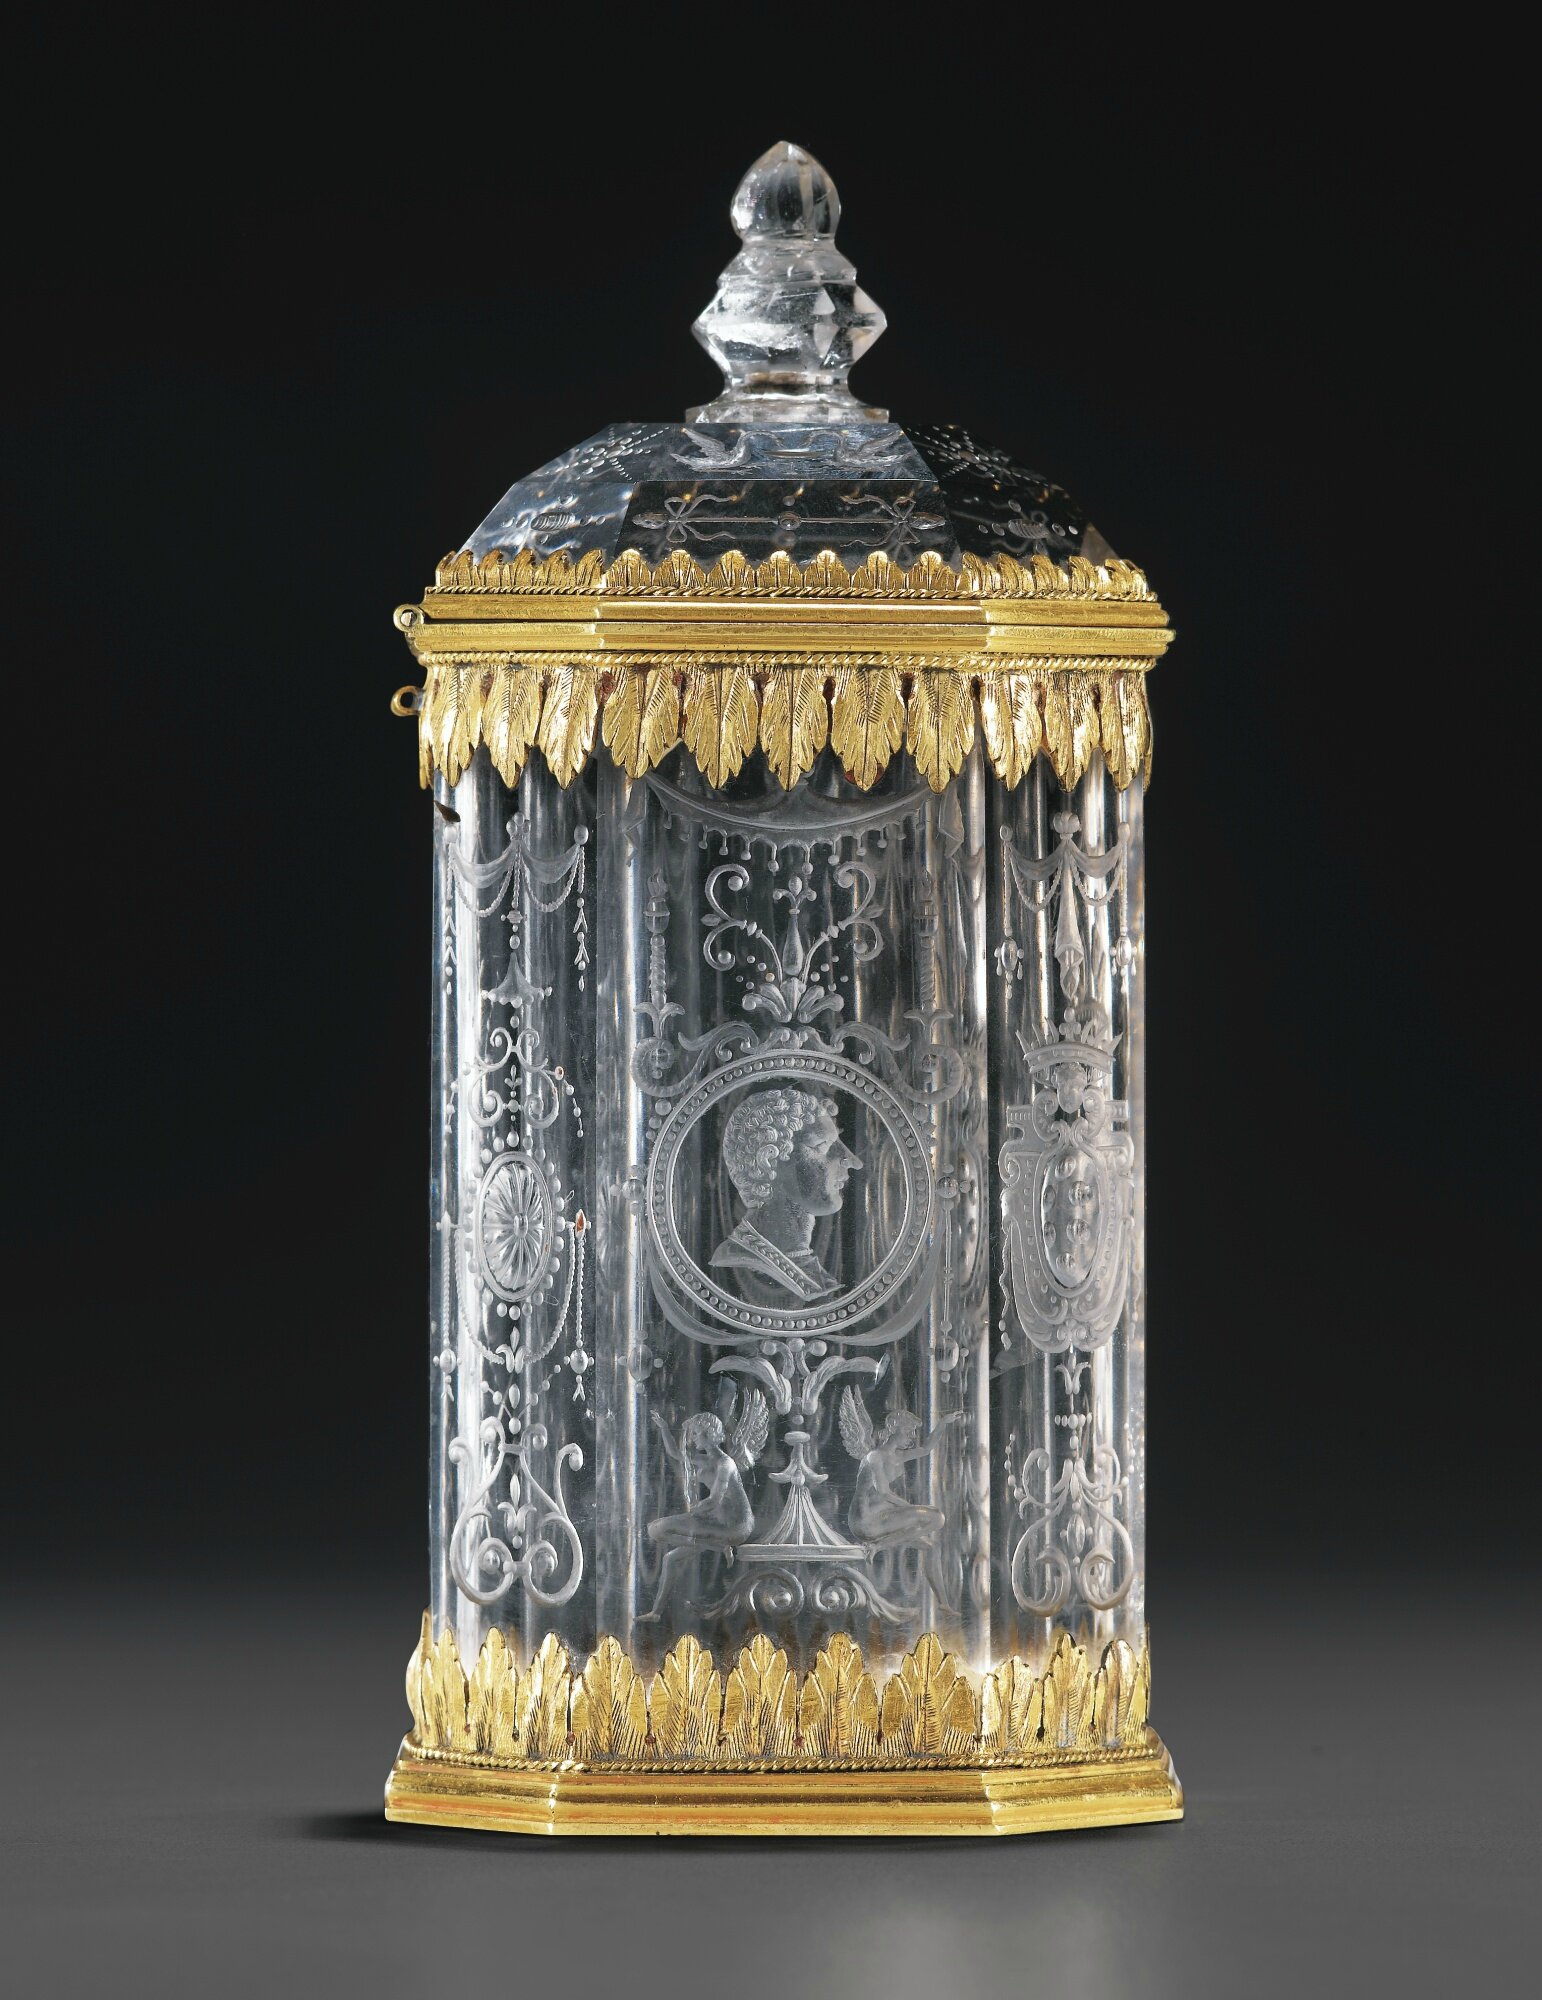 A rock crystal cup and cover with enameled gold mounts, probably French,  last third of the 19th century,, STONE III, 2022